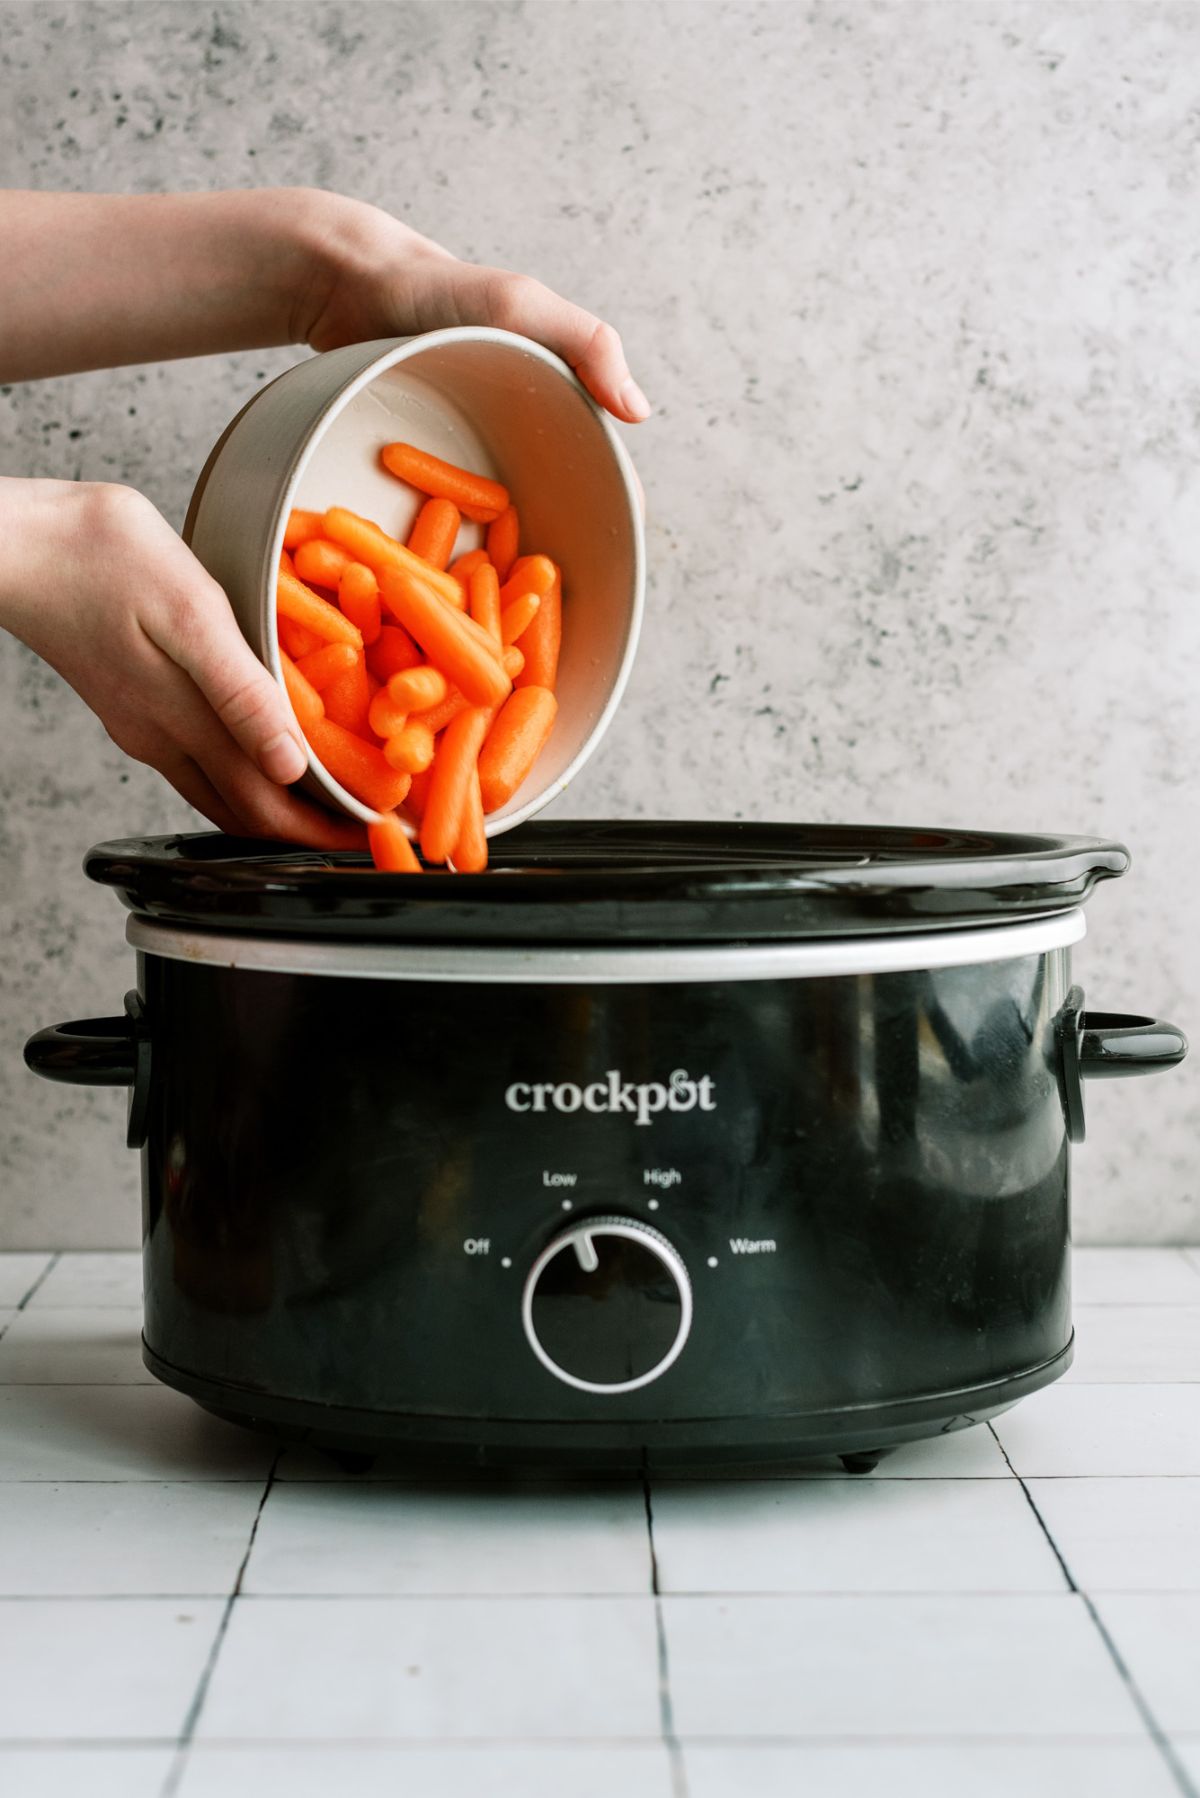 Dumping baby carrots into the slow cooker